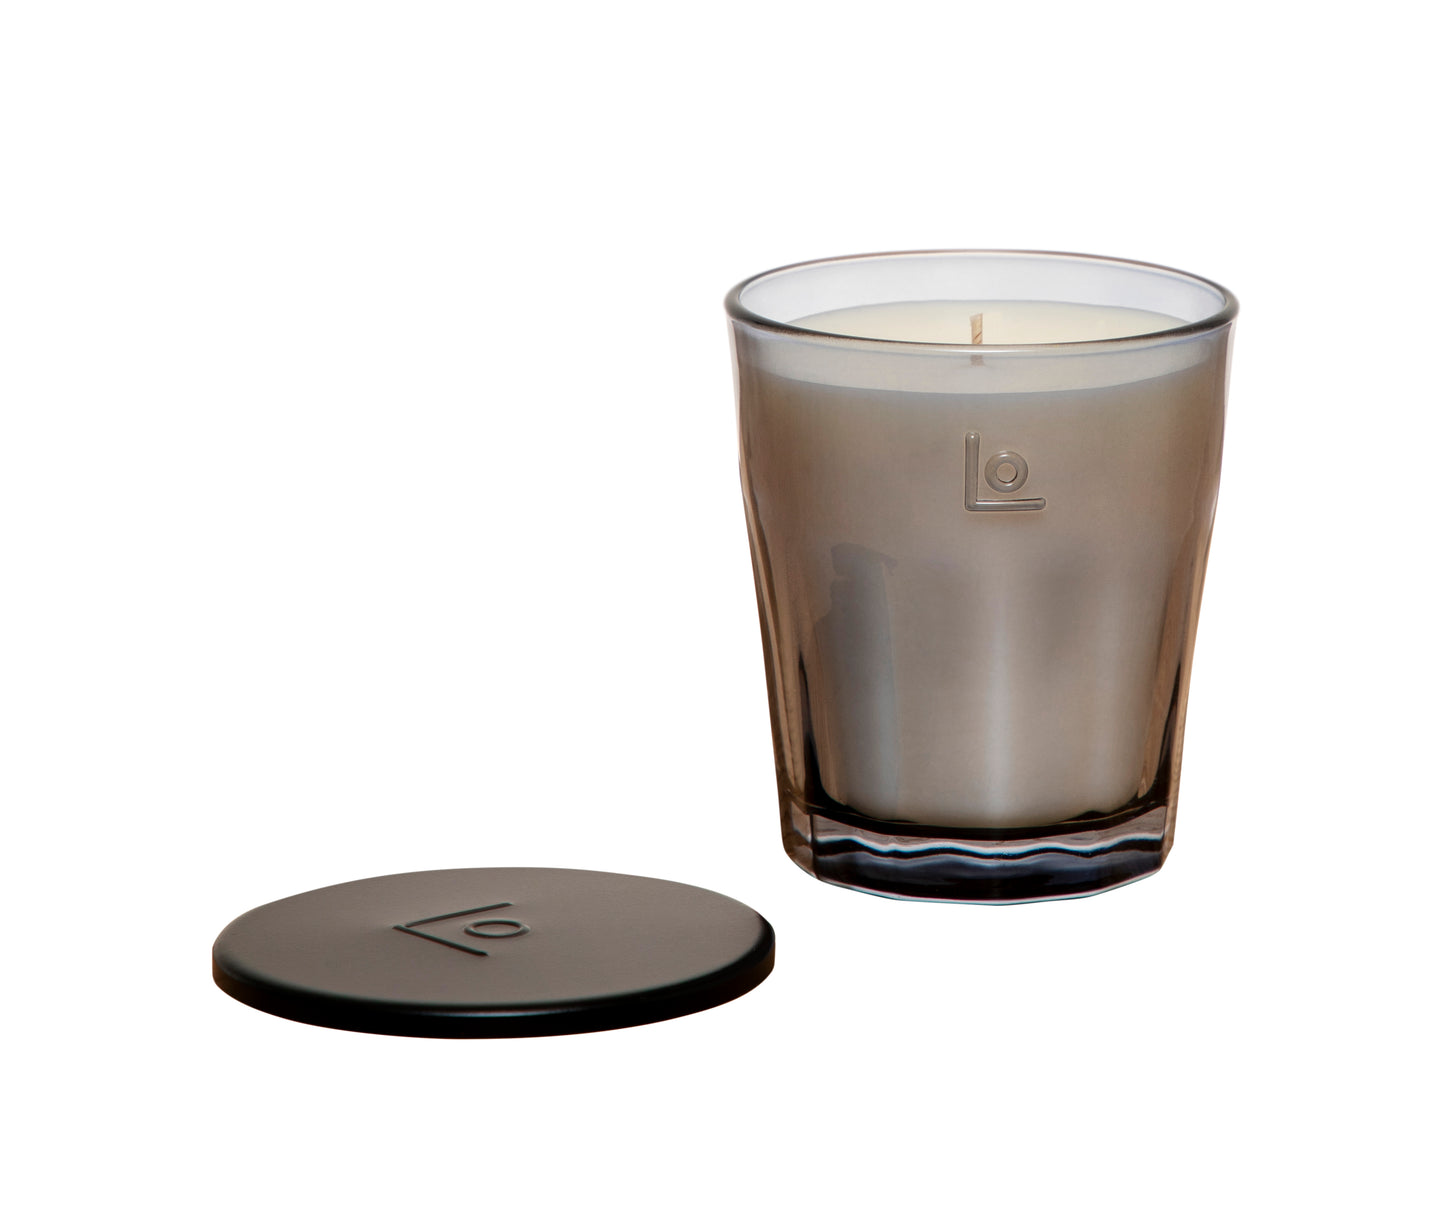 LO. Studio Palais 220g Scented Candle